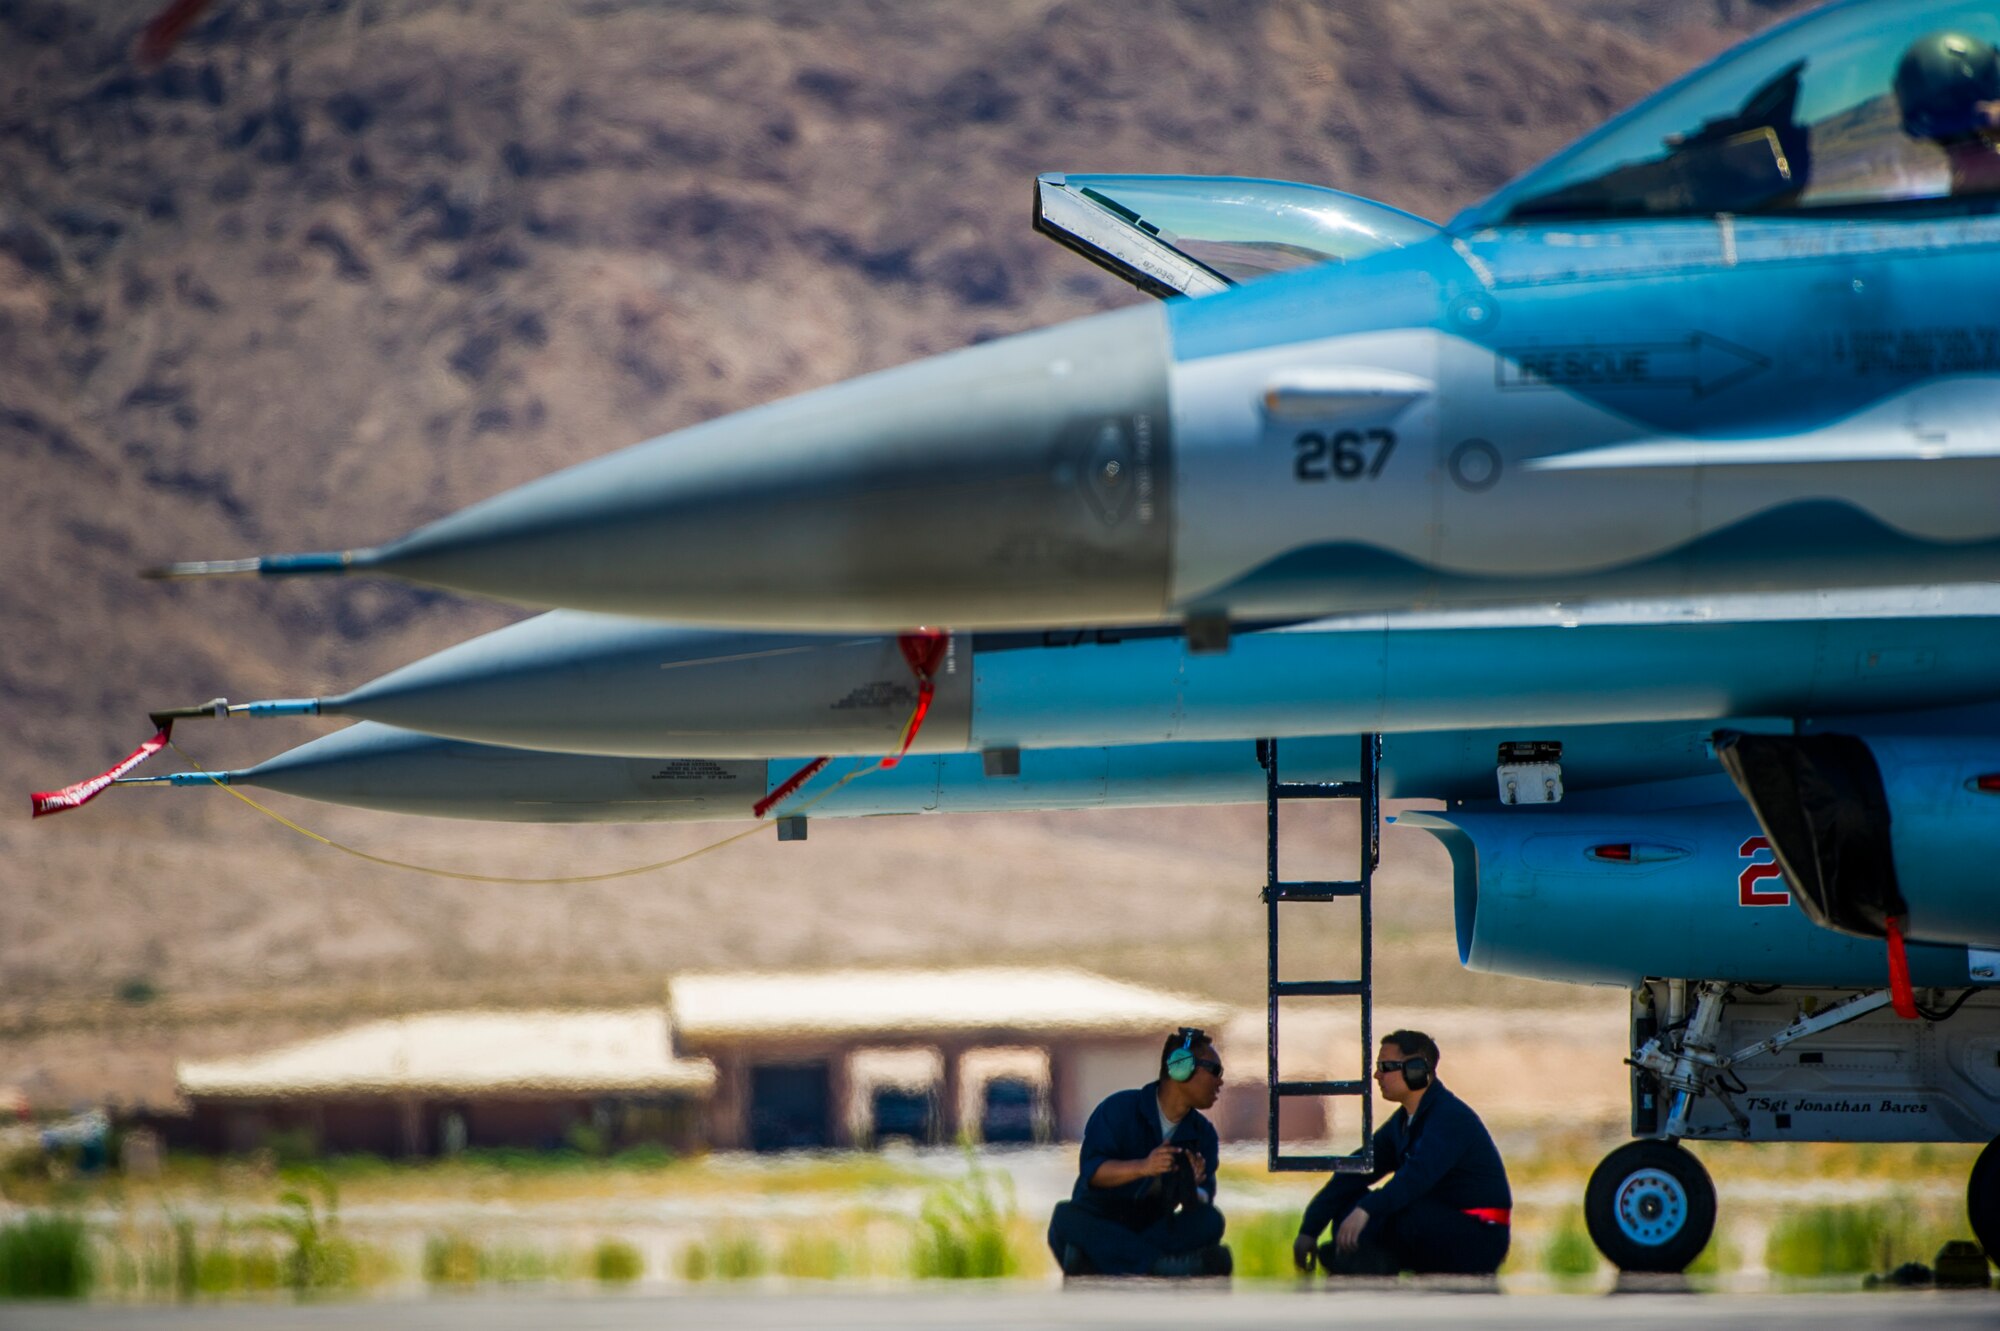 Crew chiefs assigned to the 57th Aircraft Maintenance Squadron rest underneath an F-16 fighting falcon July 13, 2019, at Nellis Air Force Base, Nev. Historically, temperatures at Nellis have reached over 118 degrees Fahrenheit. Red Flag focuses on the application of core missions to include Command and Control, Intelligence Surveillance, Strike and Personnel Recovery and how to work with Coalition counterparts to ensure success. The 706th Fighter Squadron oversees Air Force Reserve Command members assigned to the U.S. Air Force Warfare Center, supporting missions in its 57th Wing, 53rd Wing and 505th Command and Control Wing. Pilots assigned to the 706 FS fly an array of aircraft to include the F-15C, F-15E, F-16, F-22 and F-35 aircraft. To prepare combat air forces, joint and allied crews with realistic training, pilots in the 706 FS operate with the 64th Aggressor Squadron to facilitate operational threat replication, training, and feedback. The Red Flag exercise will continue through July 26, 2019.